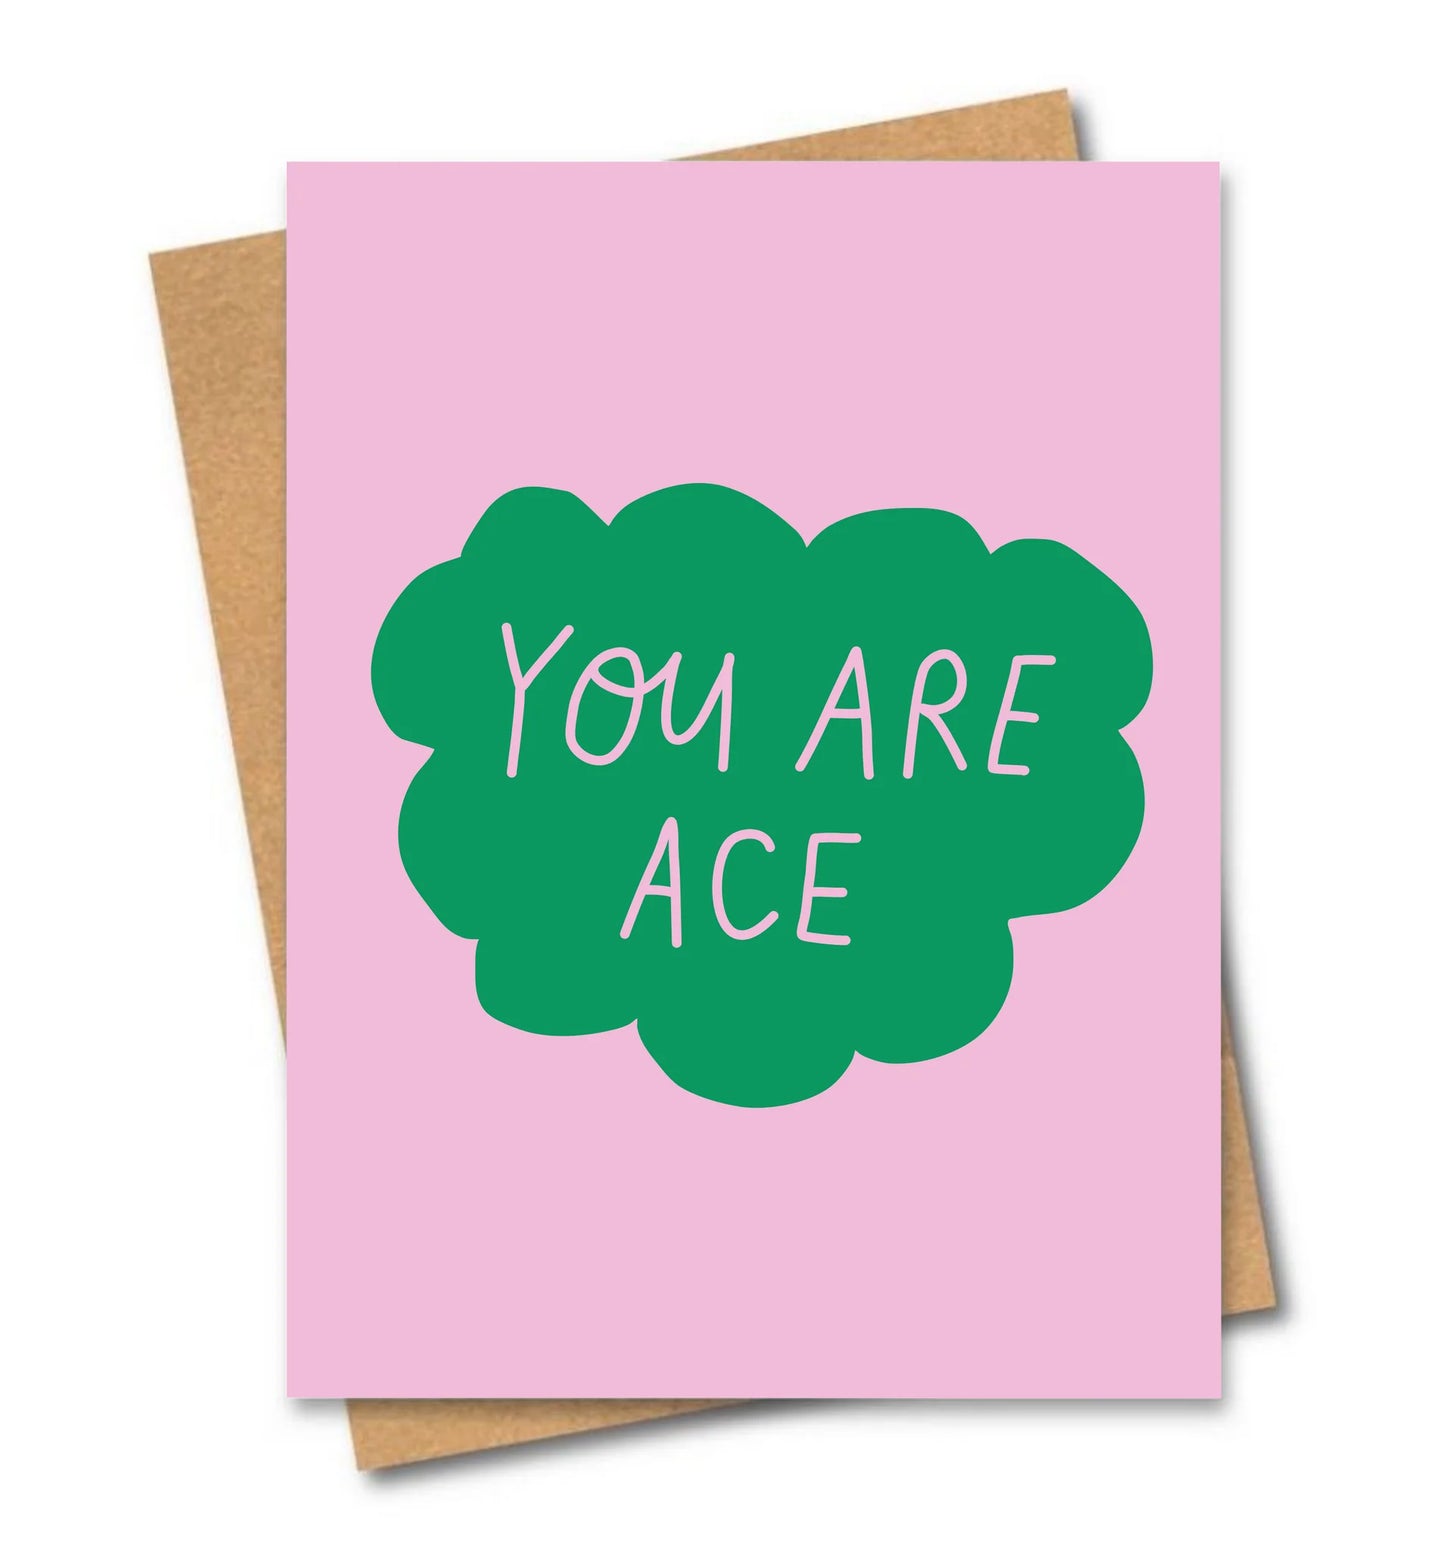 Cards - "You are Ace"